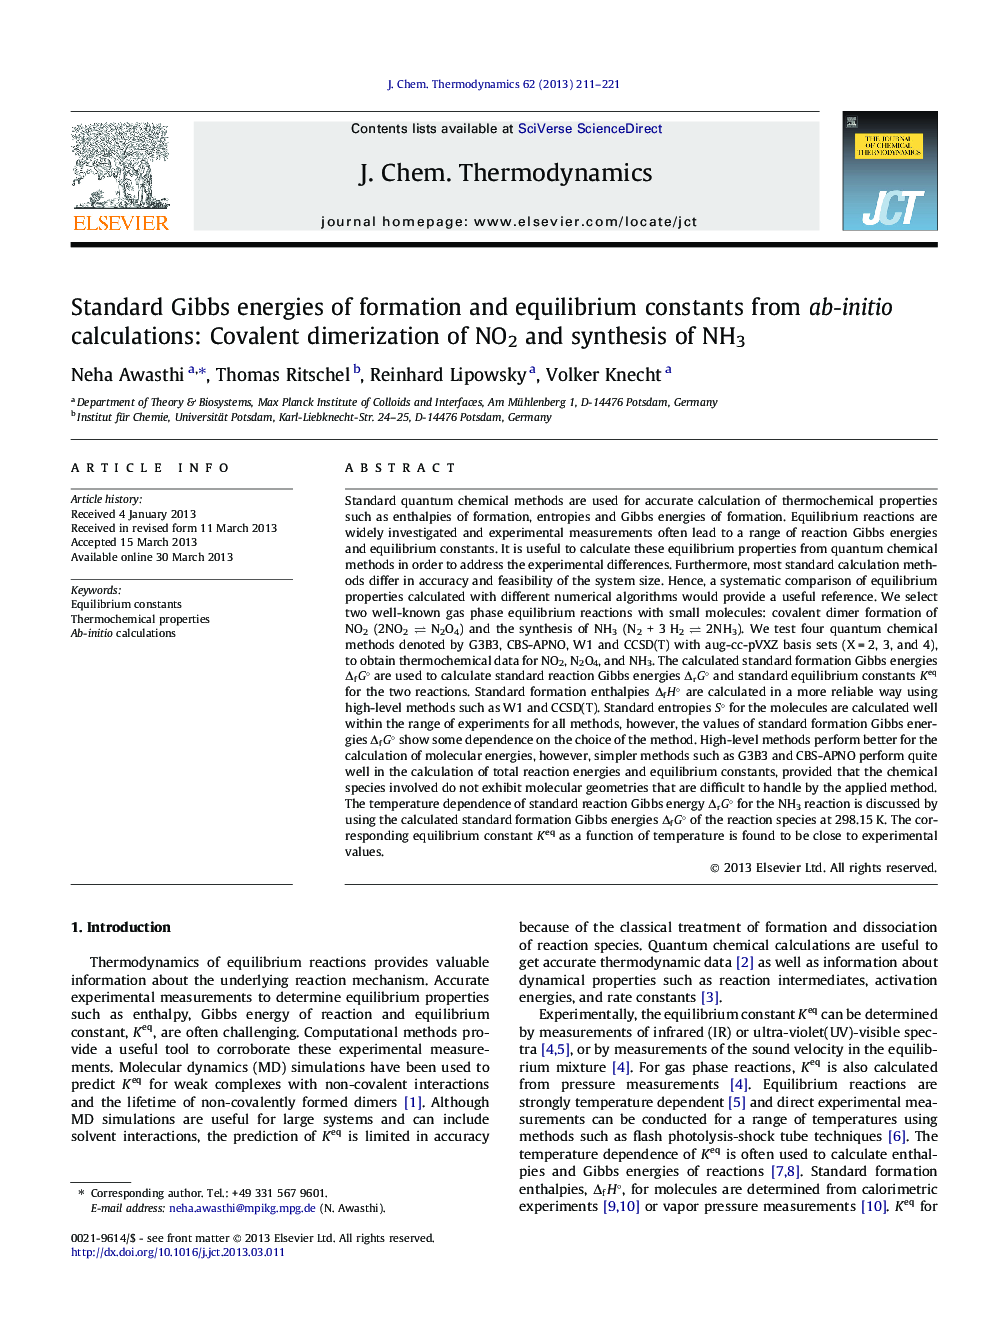 Standard Gibbs energies of formation and equilibrium constants from ab-initio calculations: Covalent dimerization of NO2 and synthesis of NH3